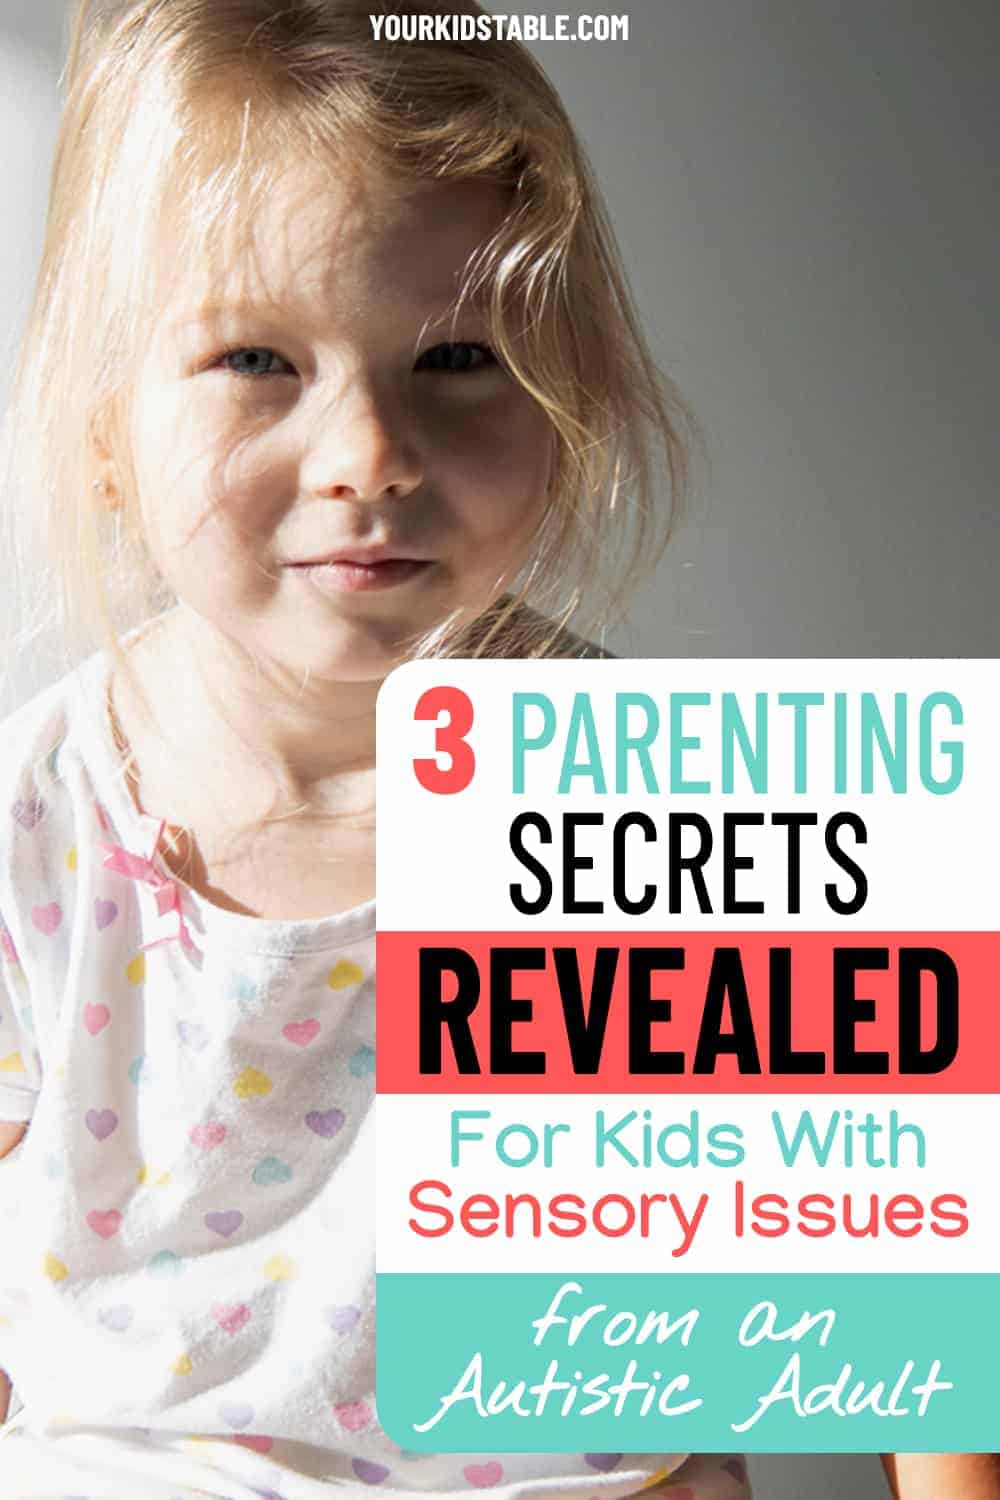 An Autistic adult, that was once an autistic girl, offers 3 things she wishes her parents knew on how to support kids with sensory issues as they grow and change.